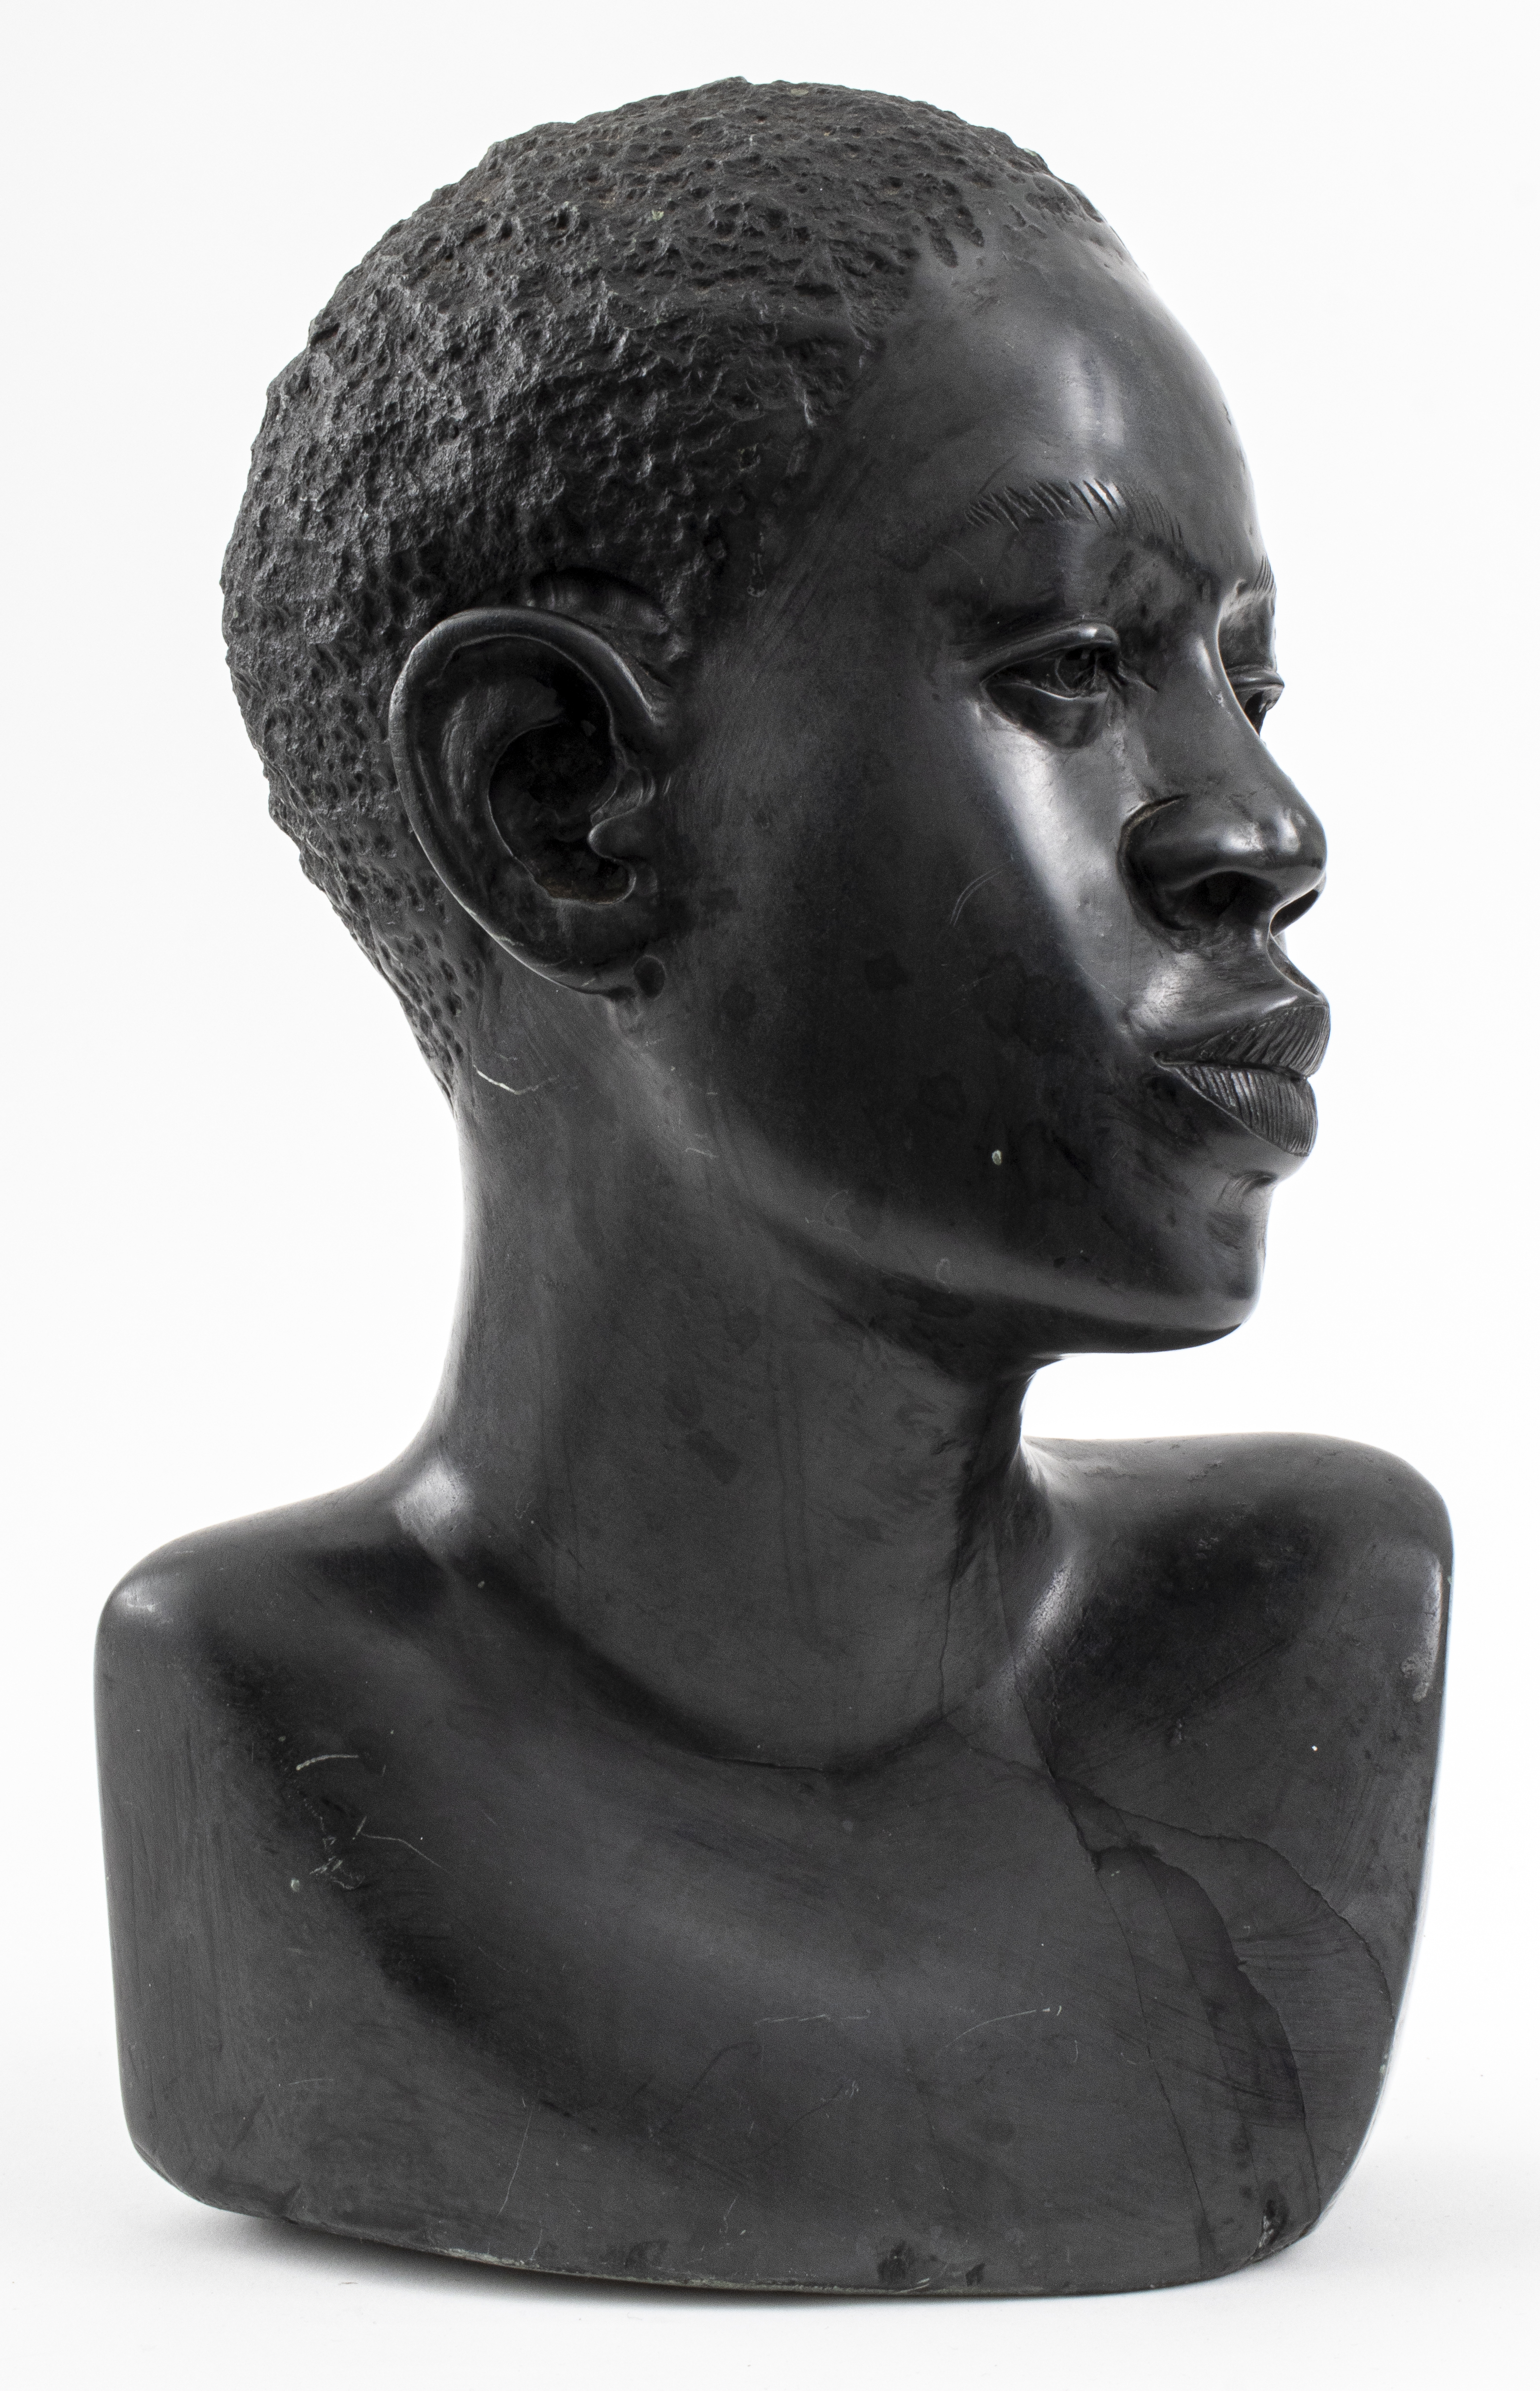 MARBLE BUST OF A YOUNG AFRICAN 2d1c59